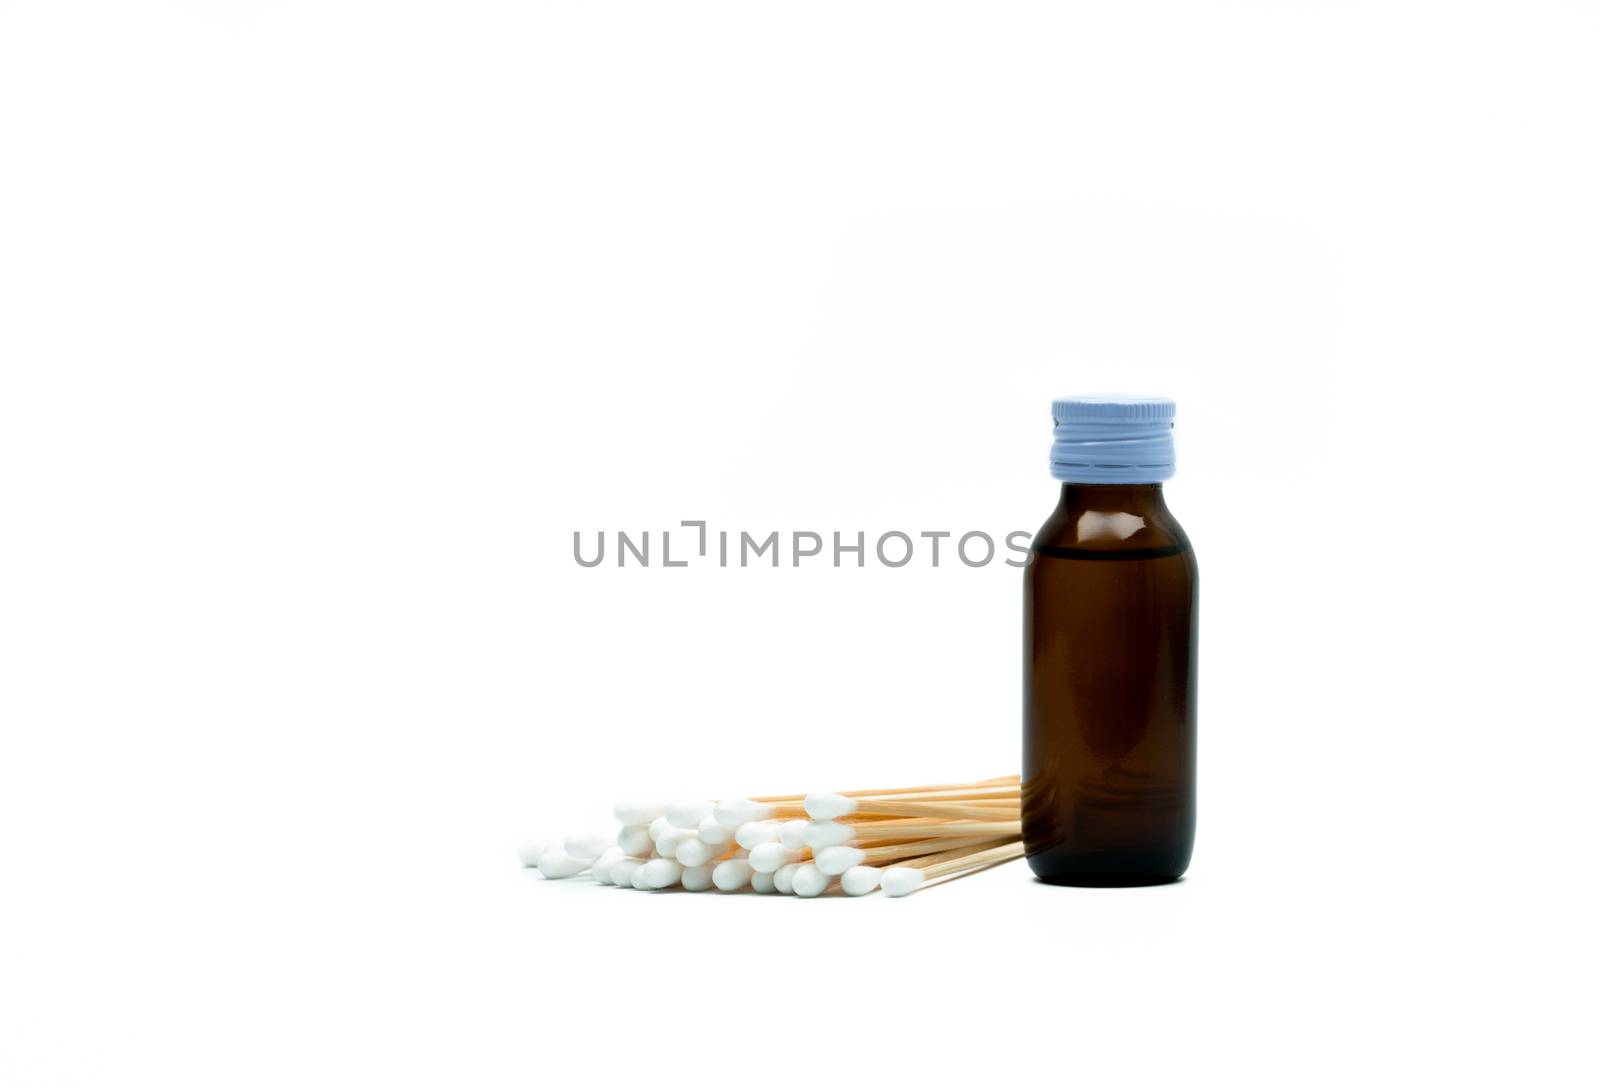 Cotton sticks and antiseptic solutions in amber glass bottle isolated on white background. Concept of Umbilical cord care for helps prevent infection. Infant's umbilical cord cleaning care equipment. by Fahroni